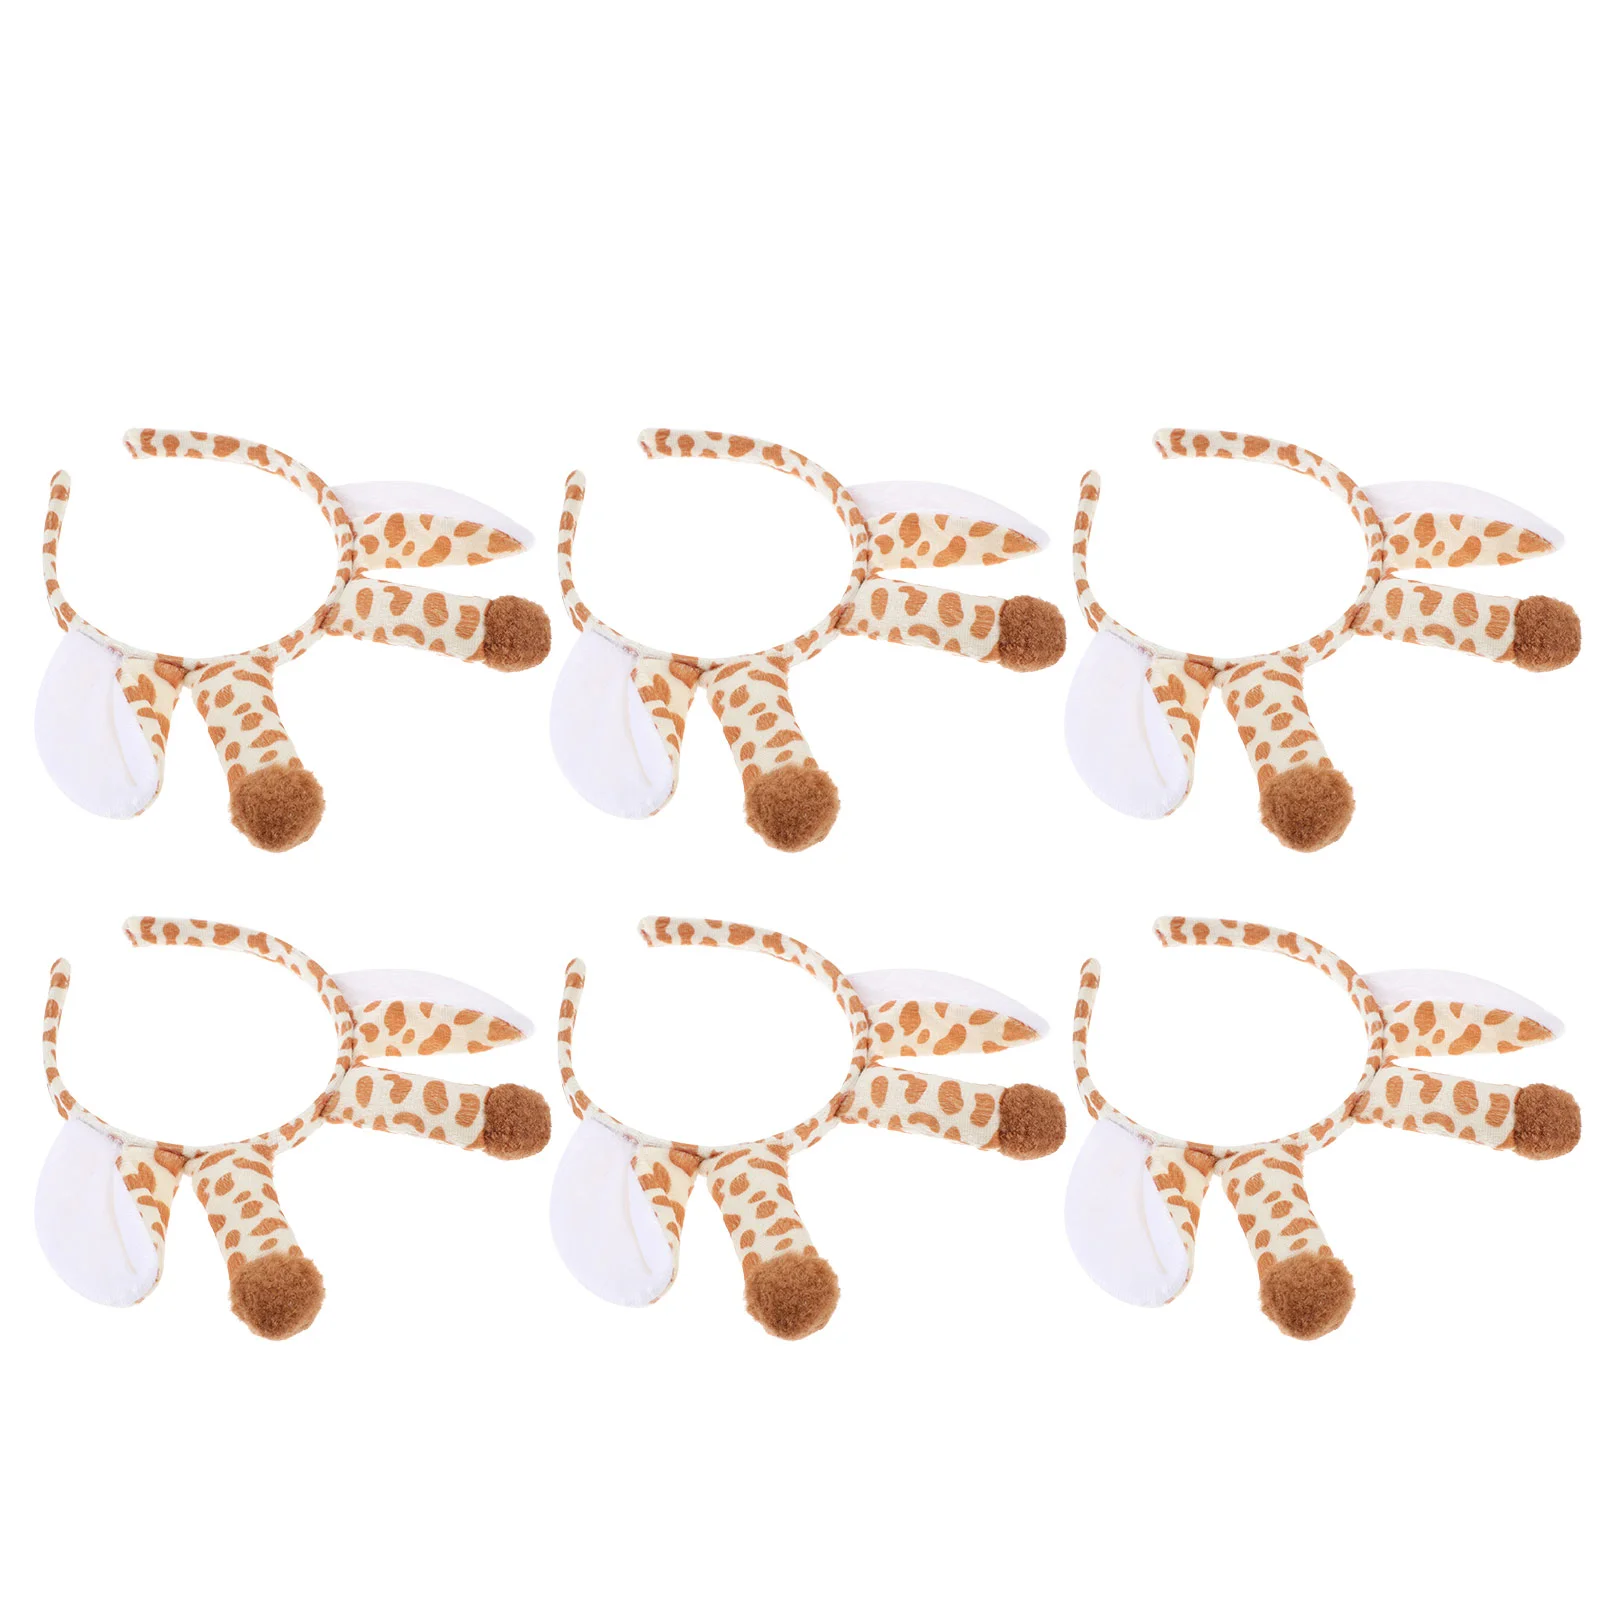 6 Pcs Animal Headband Lovely Hair Wear Decorate Christmas Party Hoops Accessories Girls Headdress Cloth for Kids Miss christmas plushies hanukkah greeting card paperboard cards blessing for party gift decorate envelopes friends classic